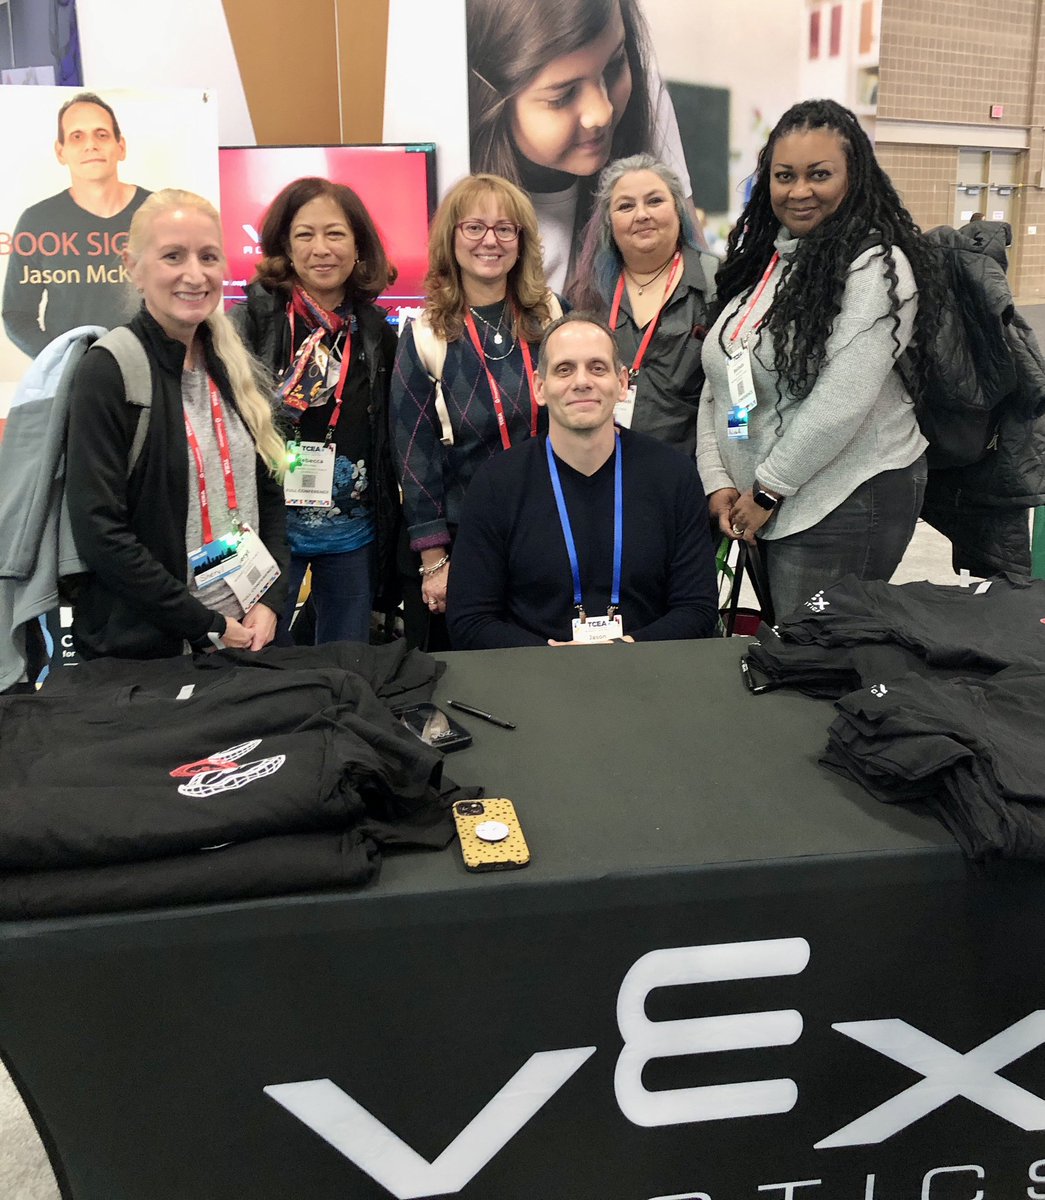 @BrowardSTEM thanks for stopping by the VEX Robotics booth at #TCEA23 and getting signed copies of @MckennaJ72 book: What STEM Can Do For Your Classroom